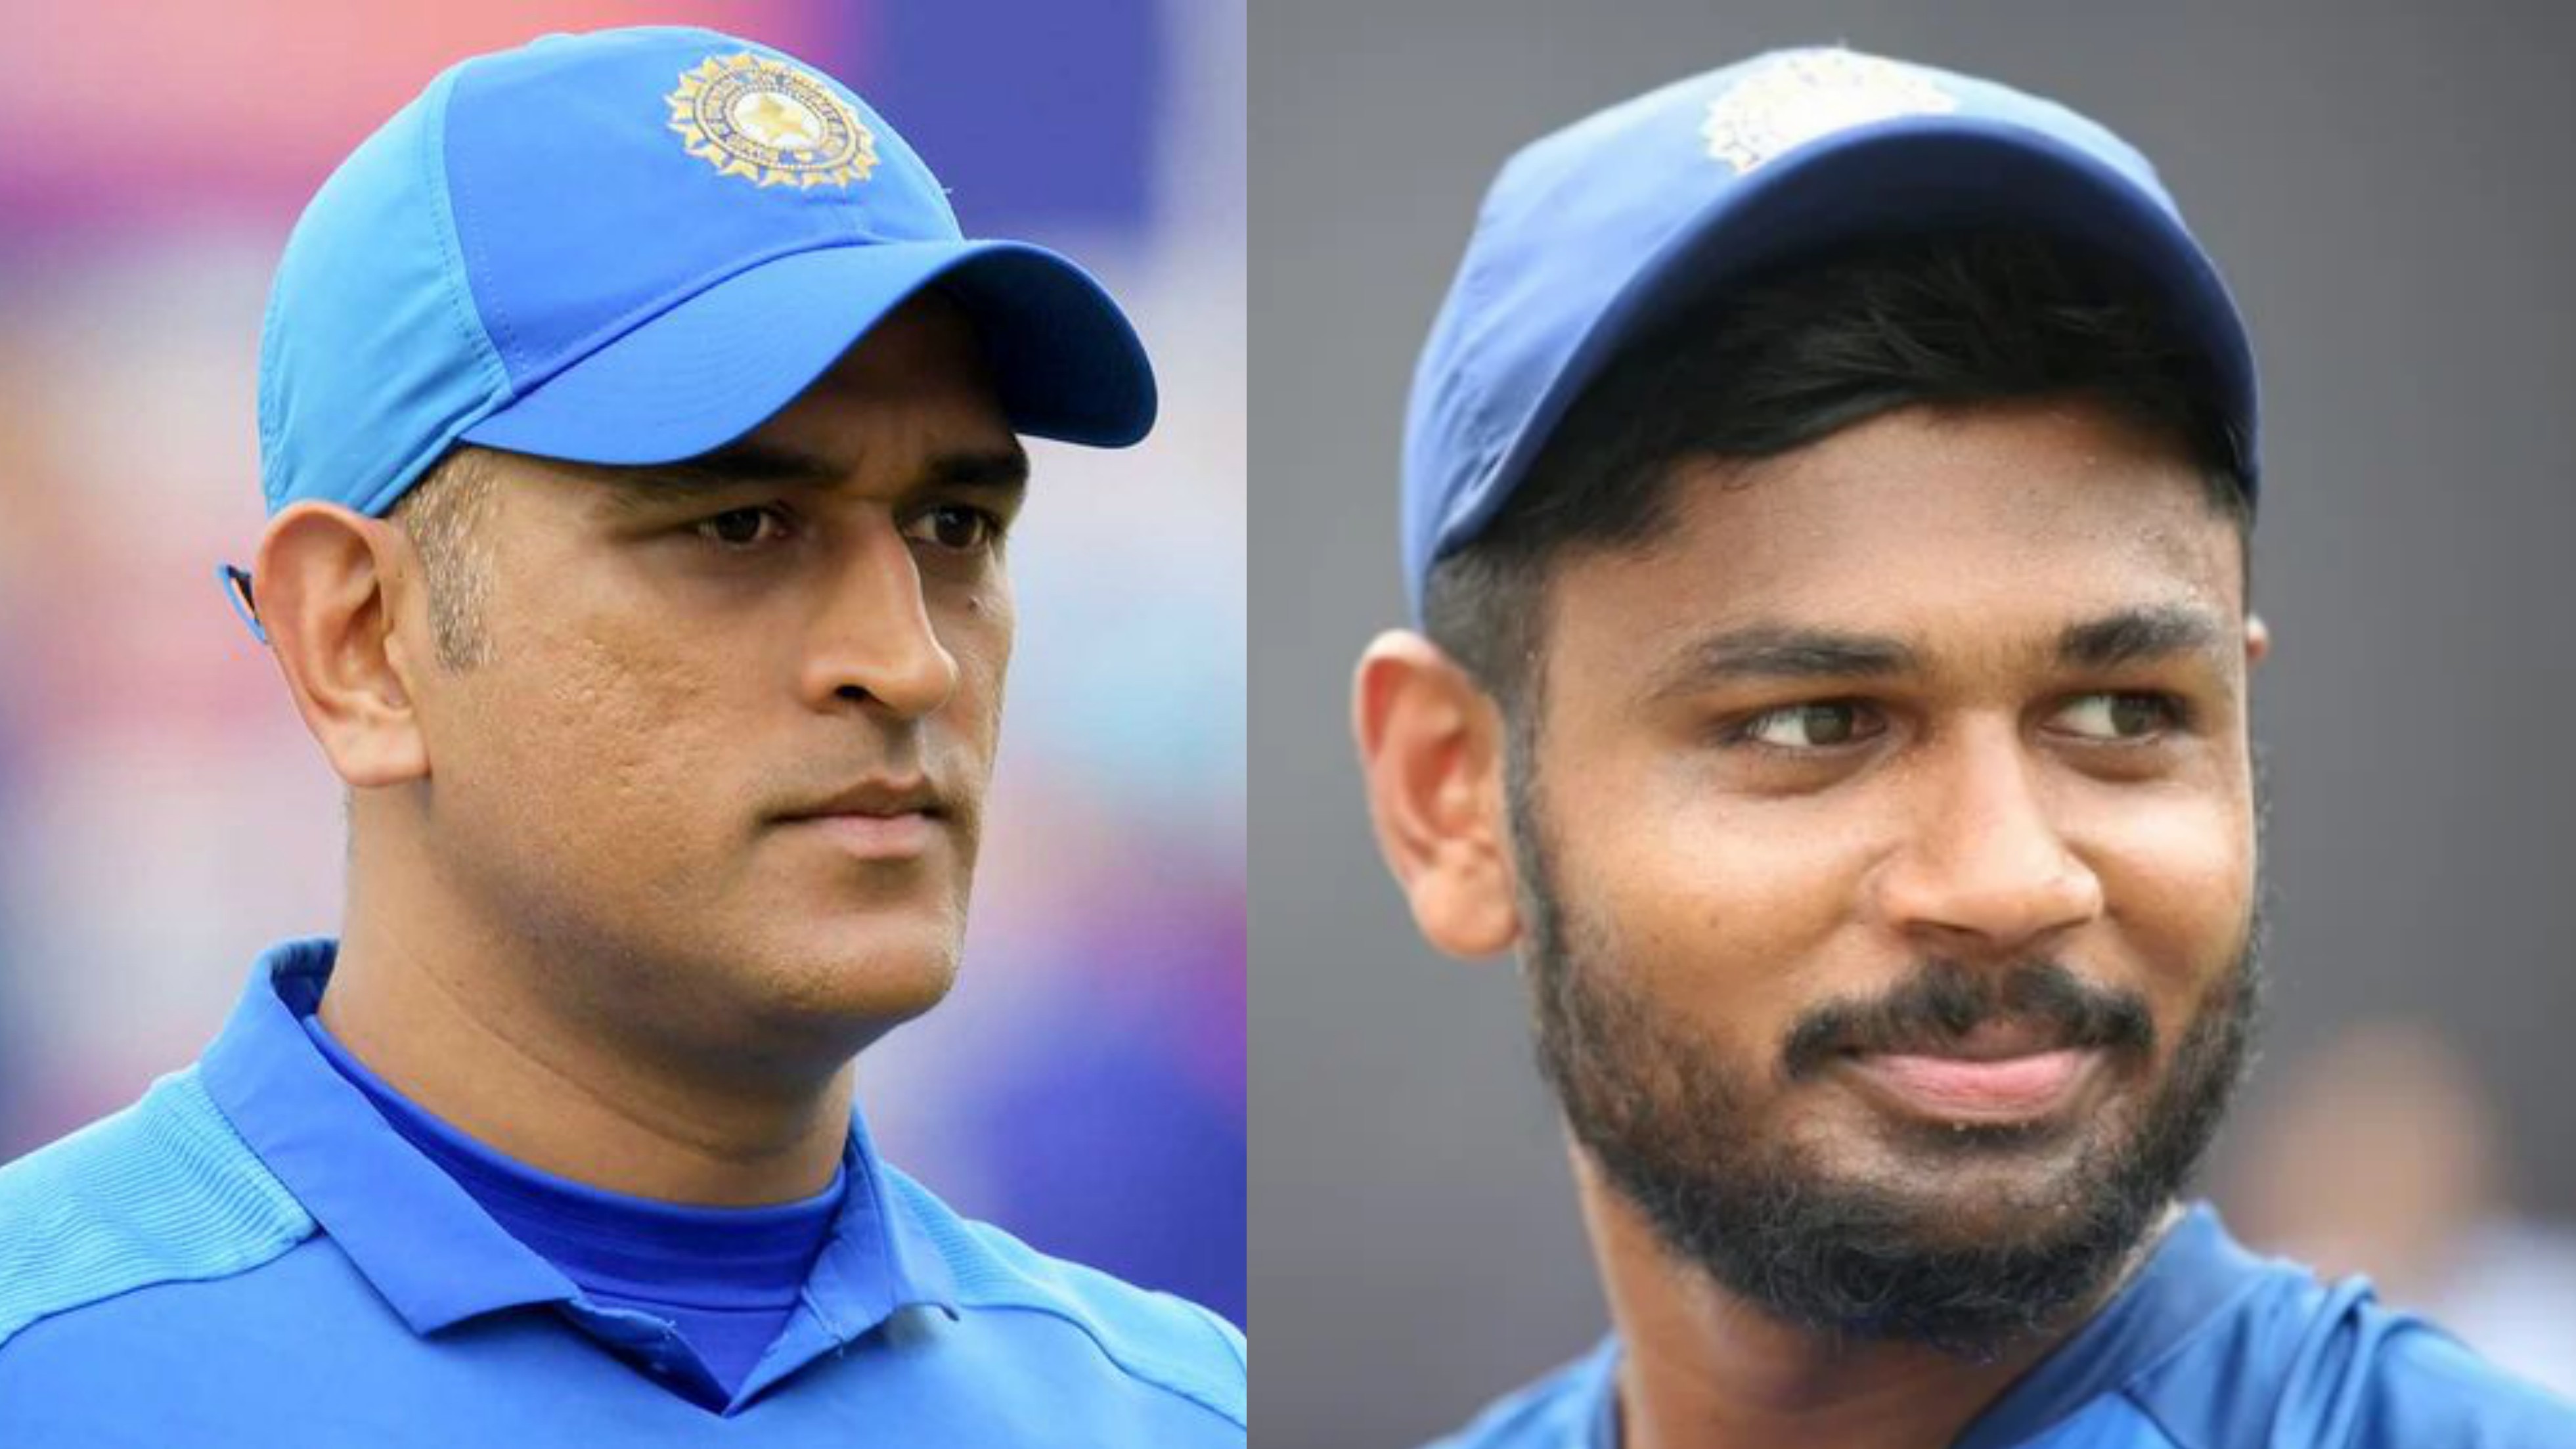 MS Dhoni's success is extra motivation to others coming from small cities, says Sanju Samson